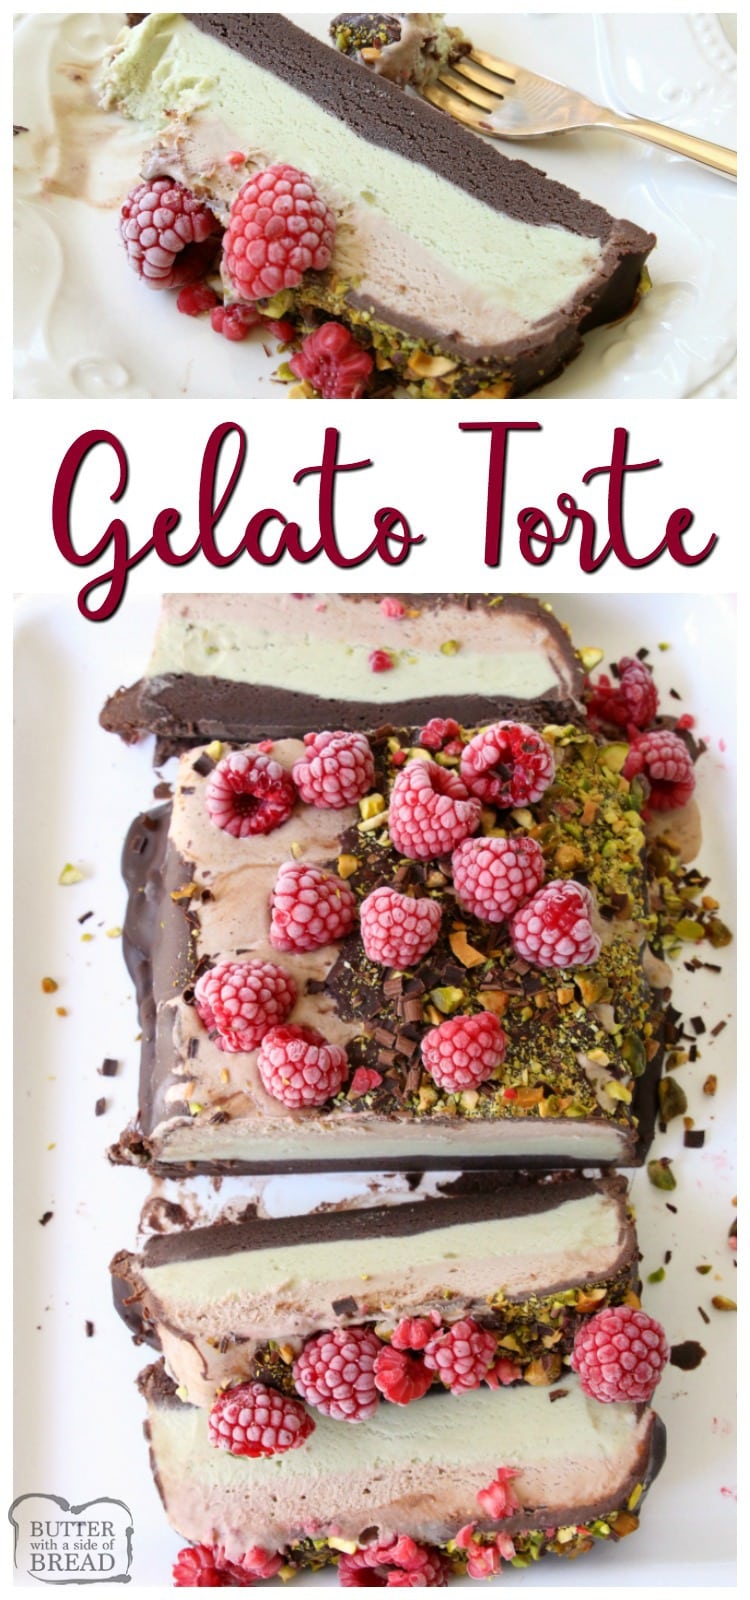 Gorgeous Gelato Torte recipe with sophisticated flavors. Three layers of rich, creamy gelato topped with chocolate ganache, pistachios & fresh raspberries.